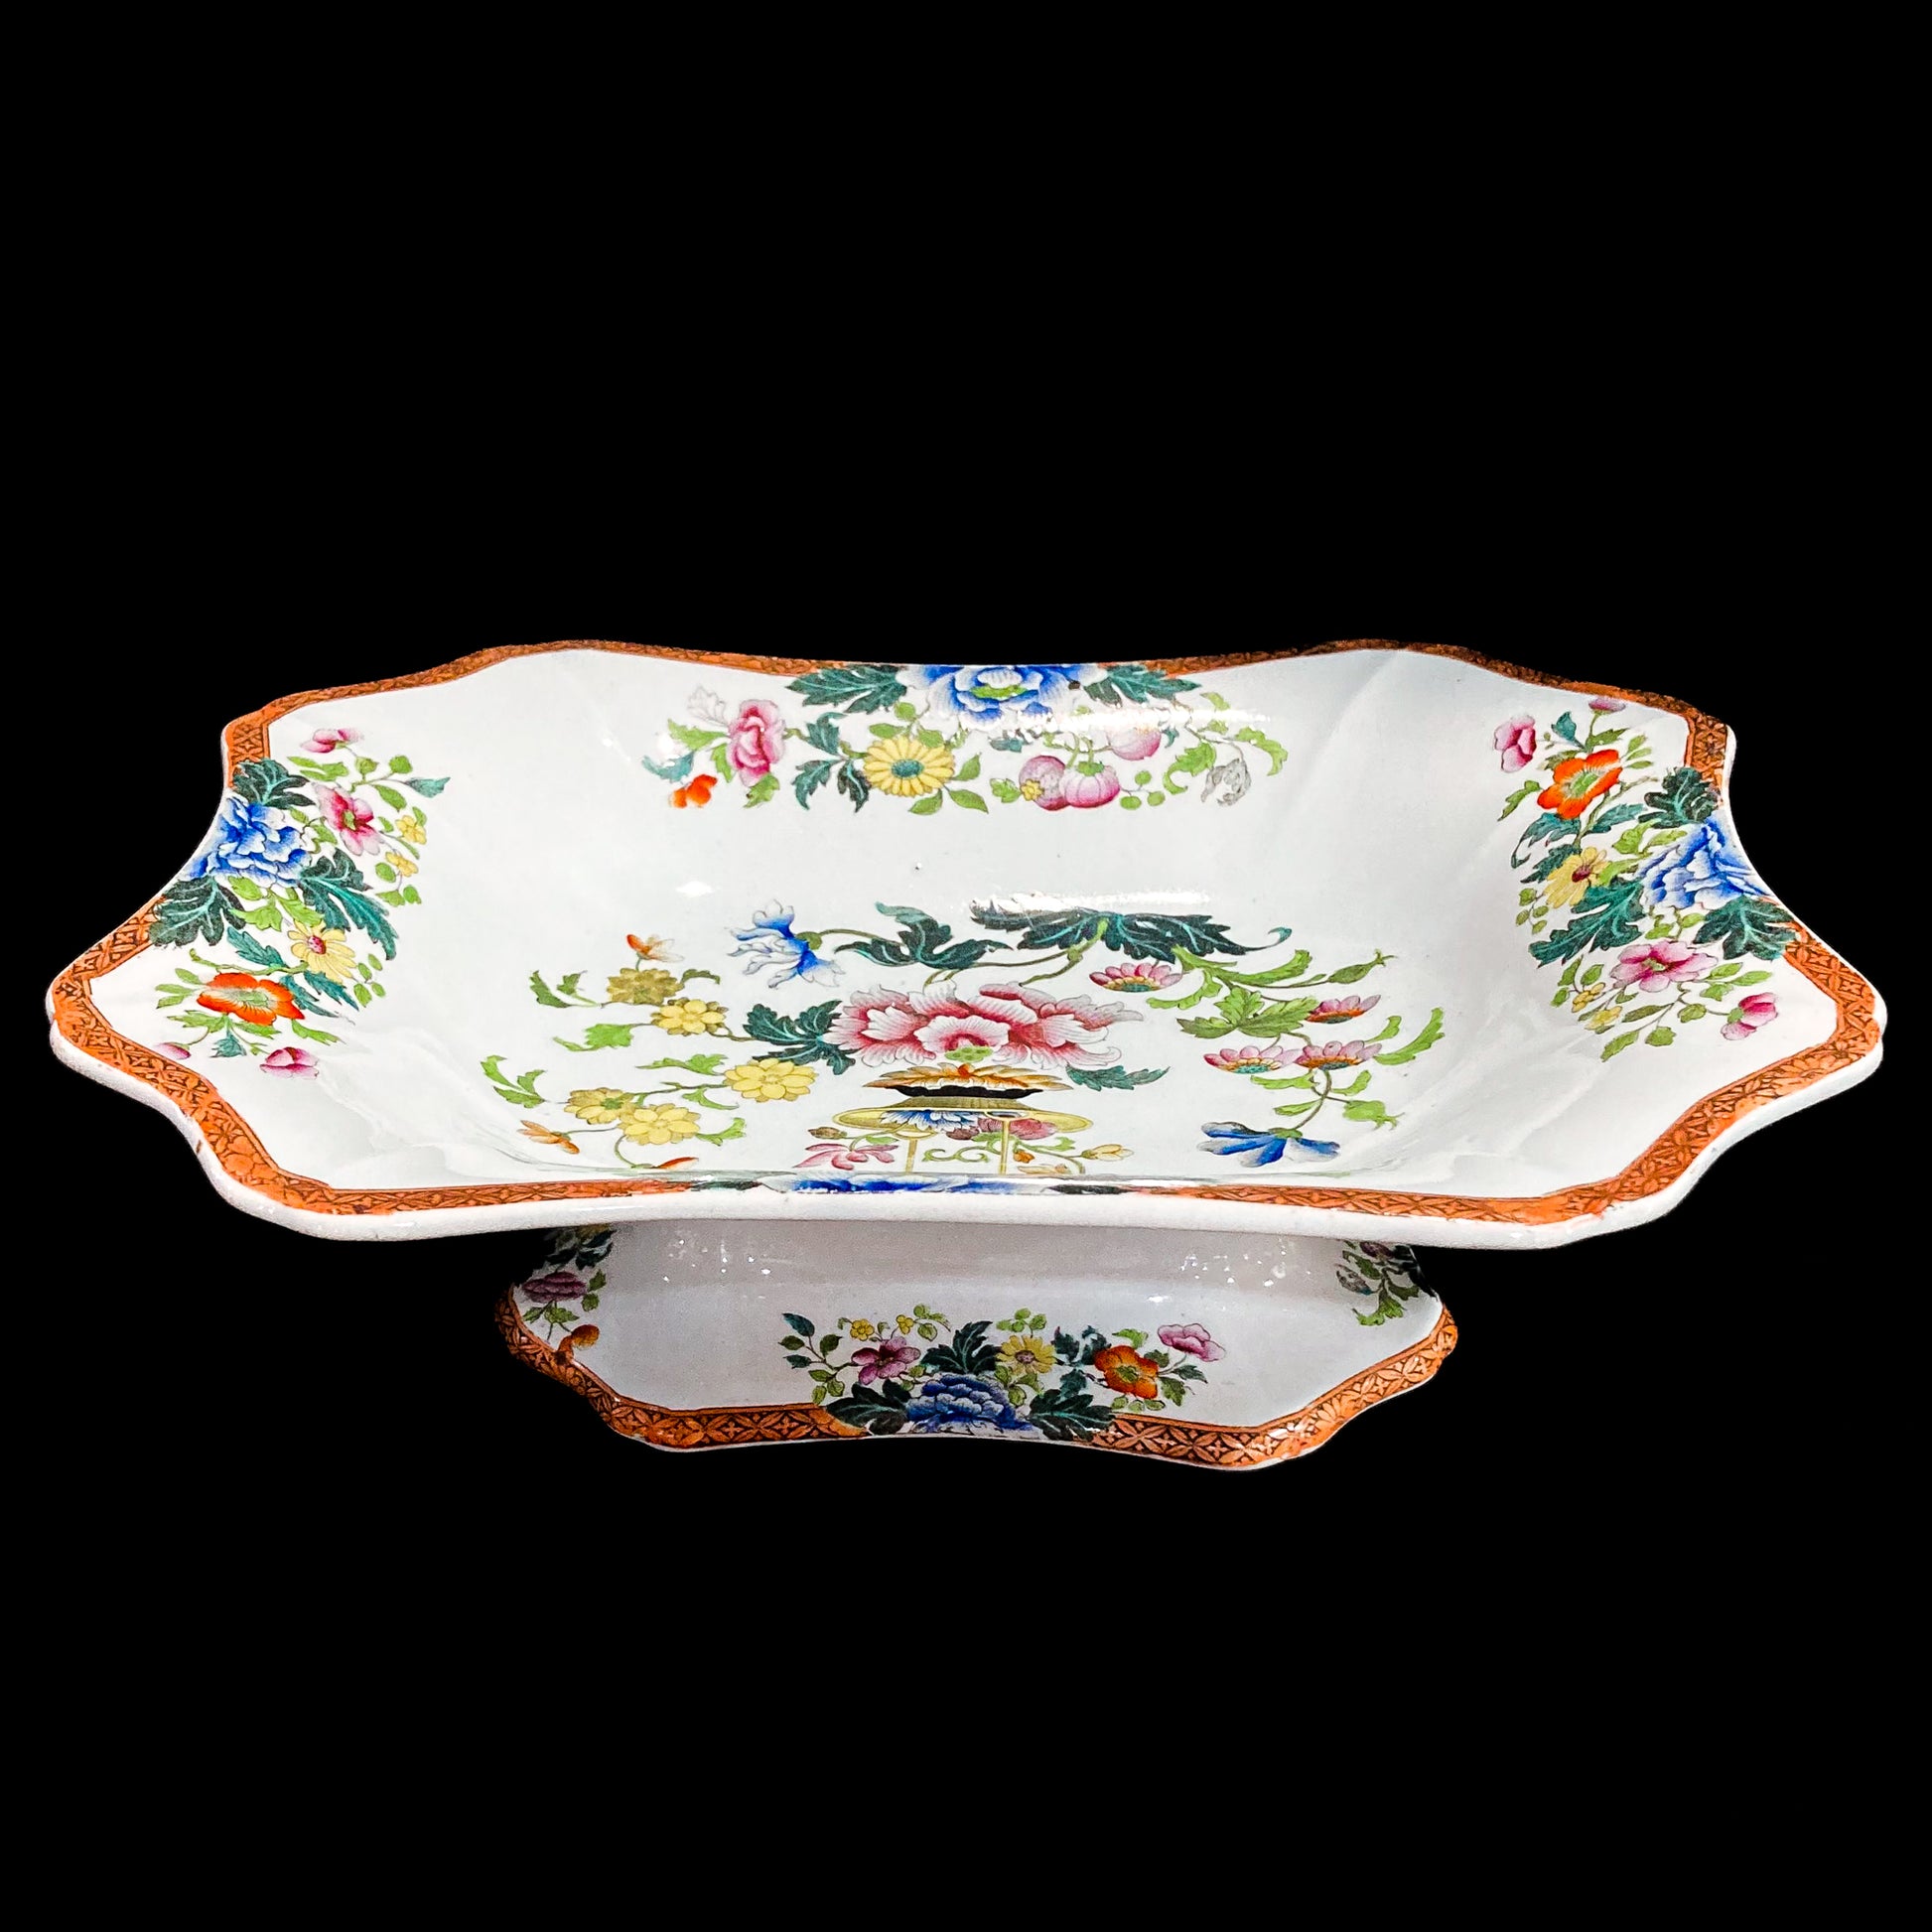 Antique 1850s Wedgwood Enameled Multicolor Floral Footed Compote Dish 4